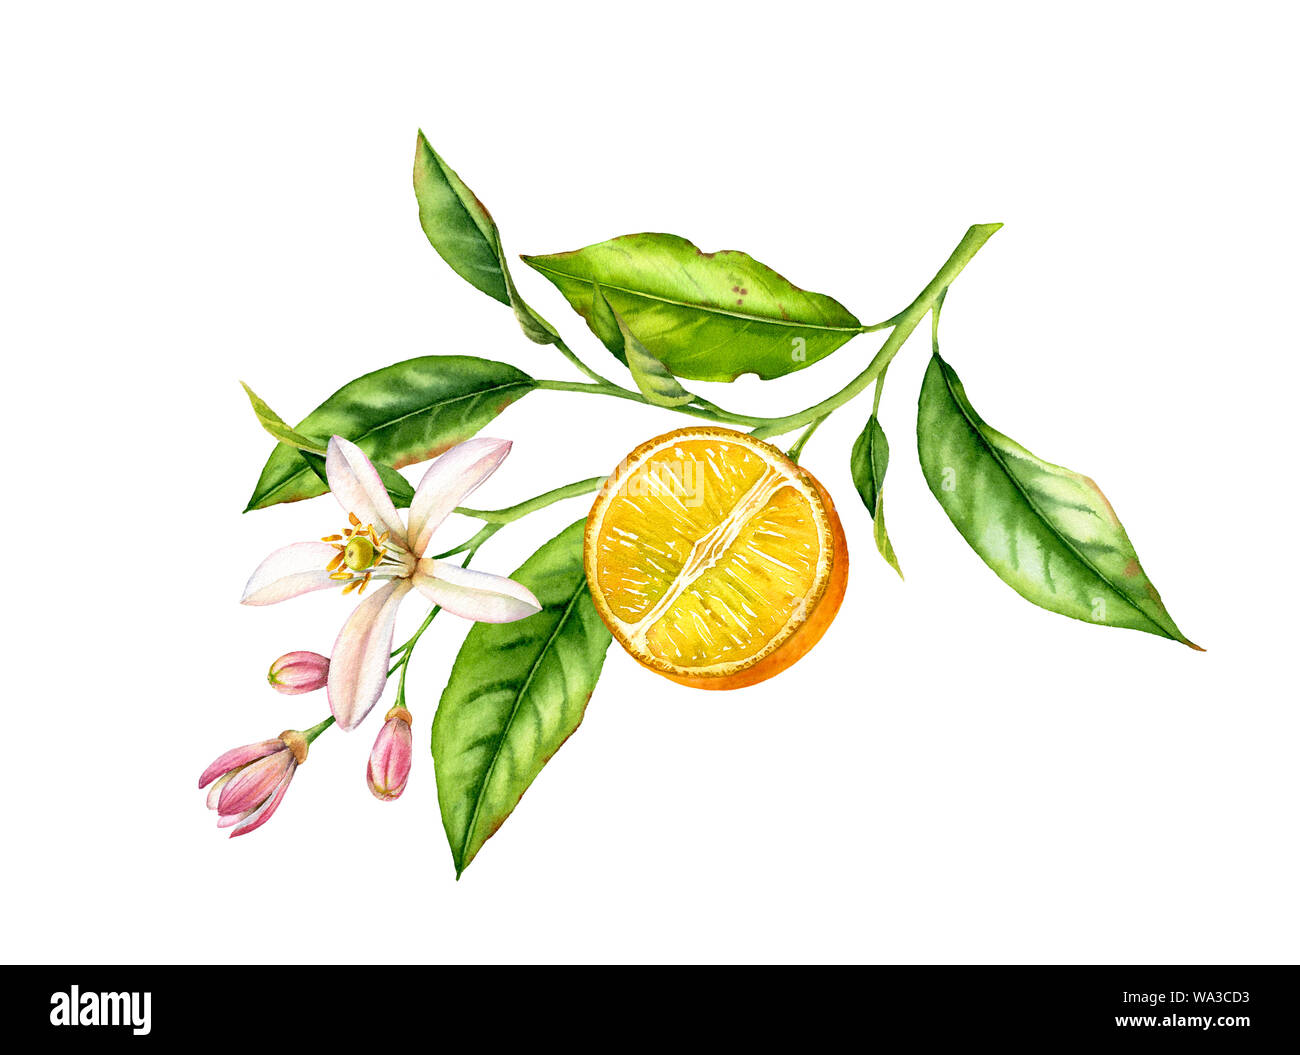 Orange fruit branch with flowers. Realistic botanical watercolor illustration with half slice citrus, hand drawn isolated floral design on white. Stock Photo